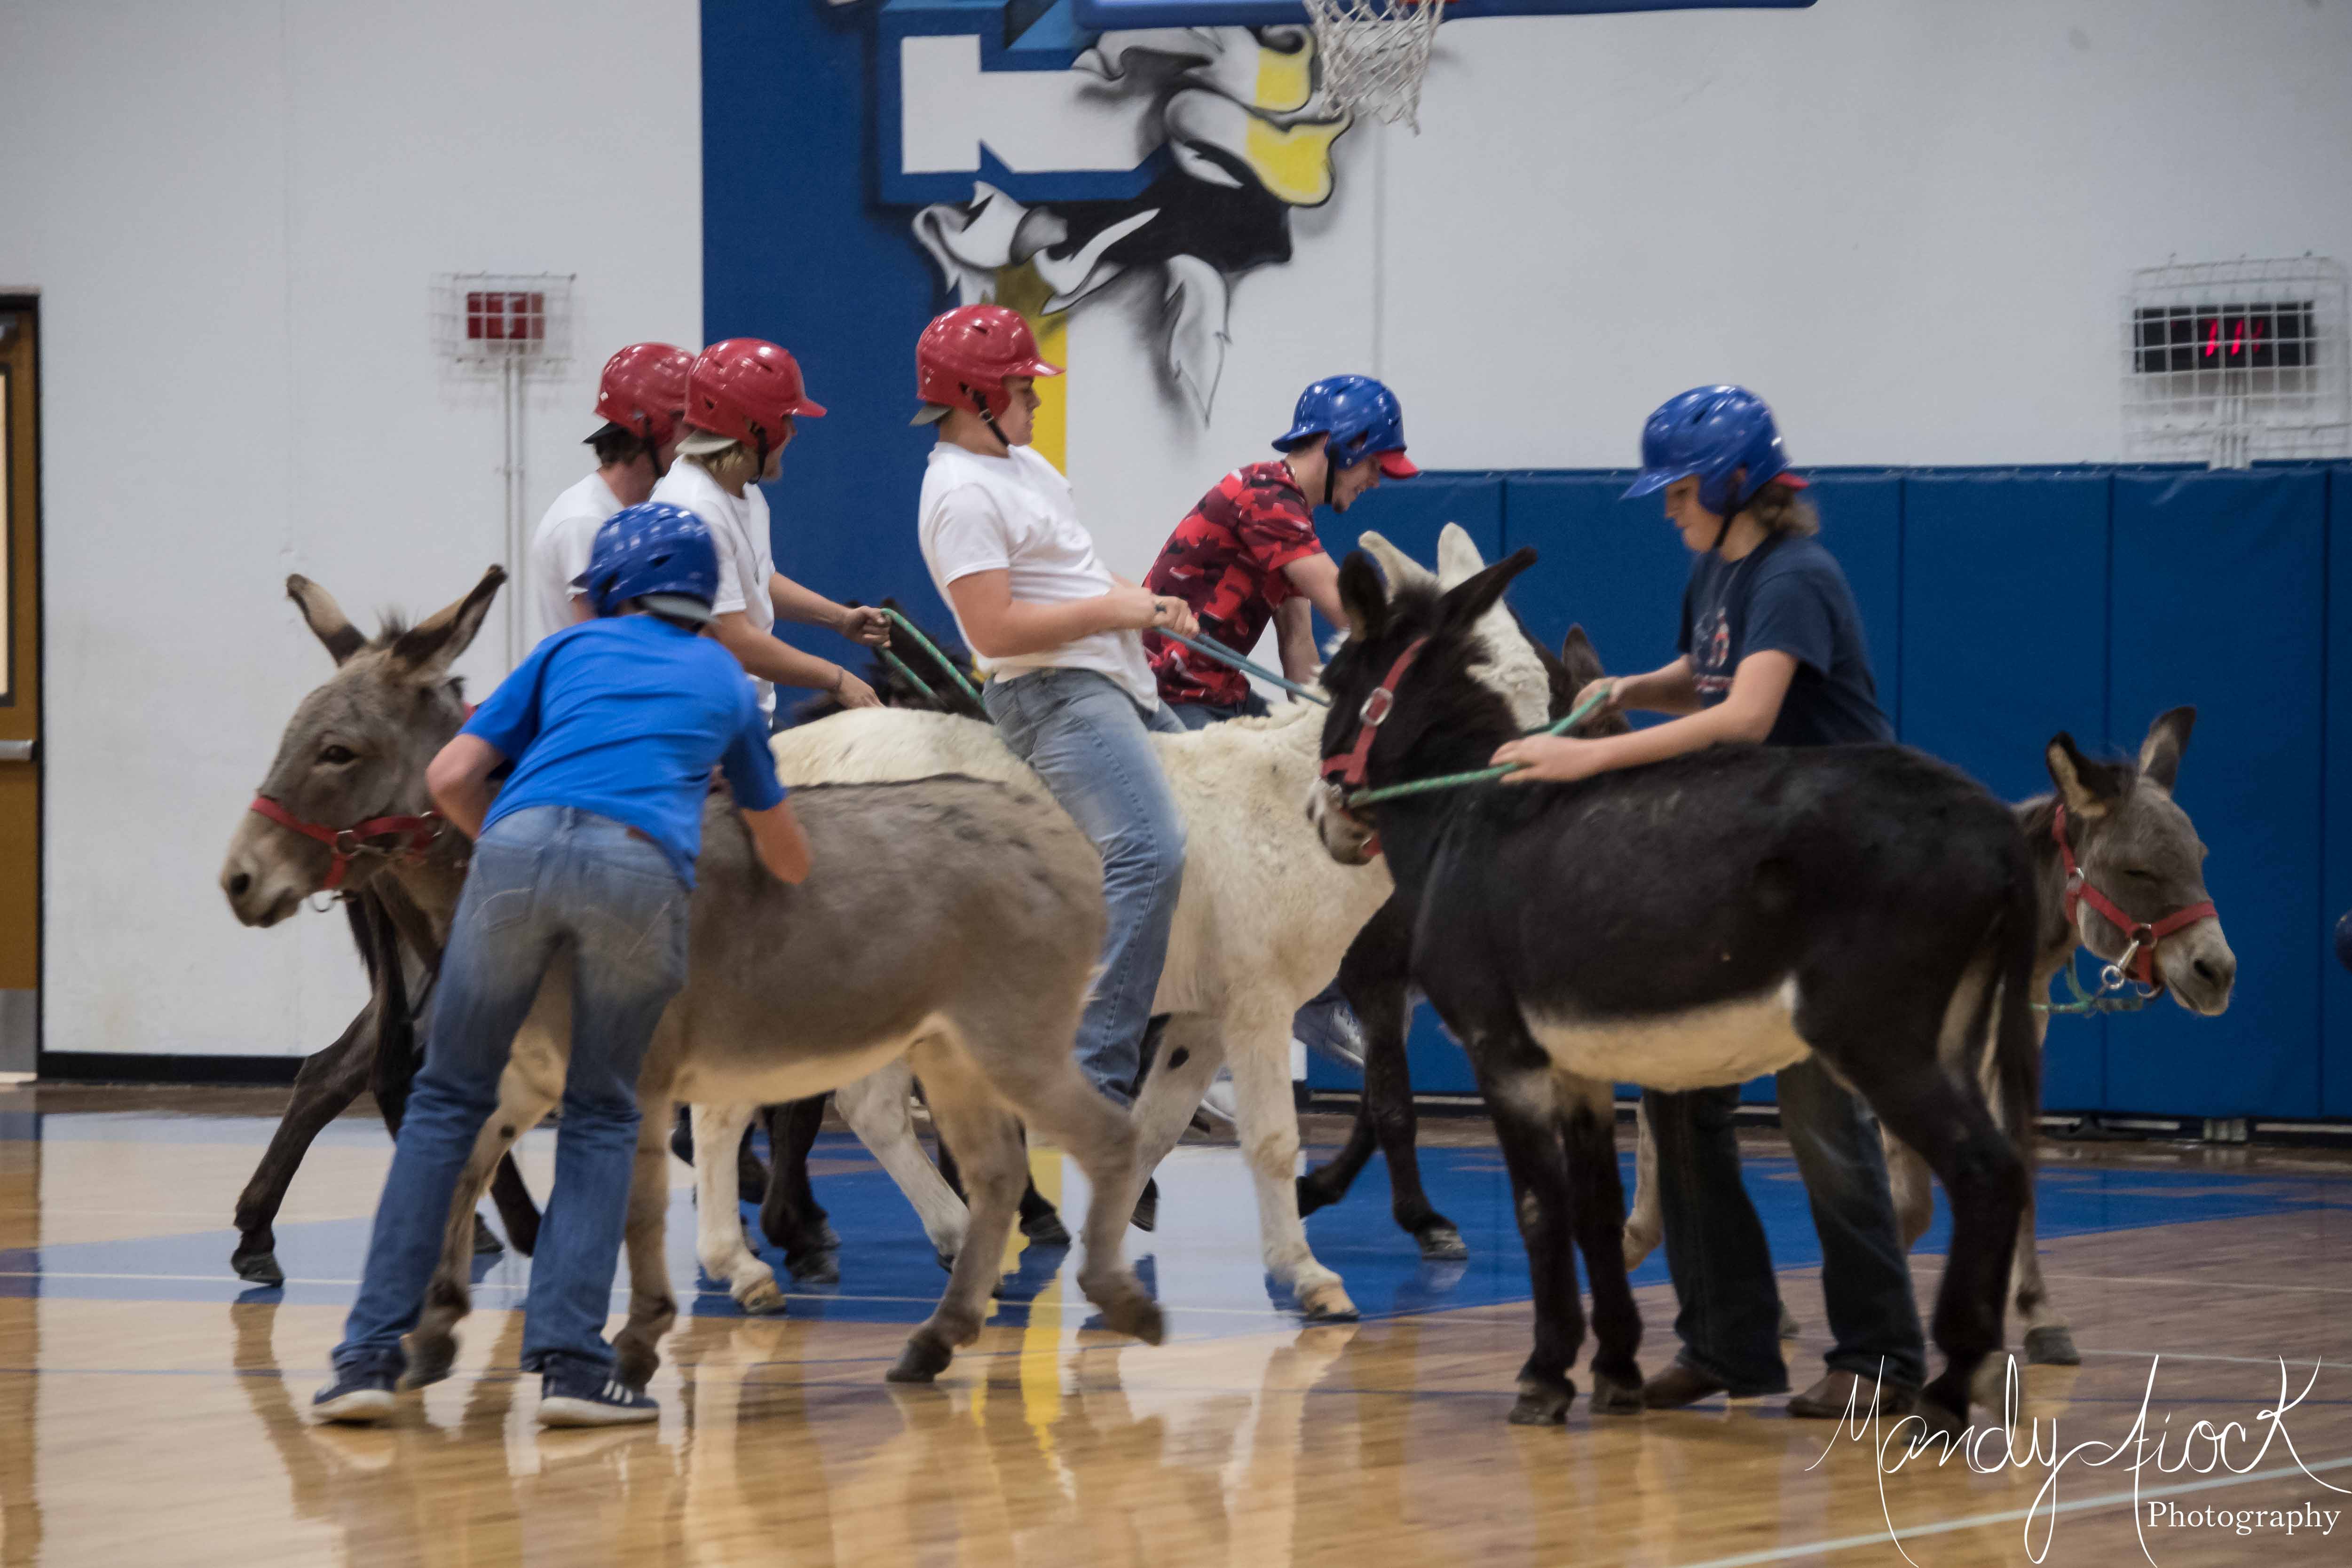 Photos from the Hopkins County Fall Festival Dairyland Donkey Basketball Games and Cover Girl Presentation by Mandy Fiock Photography